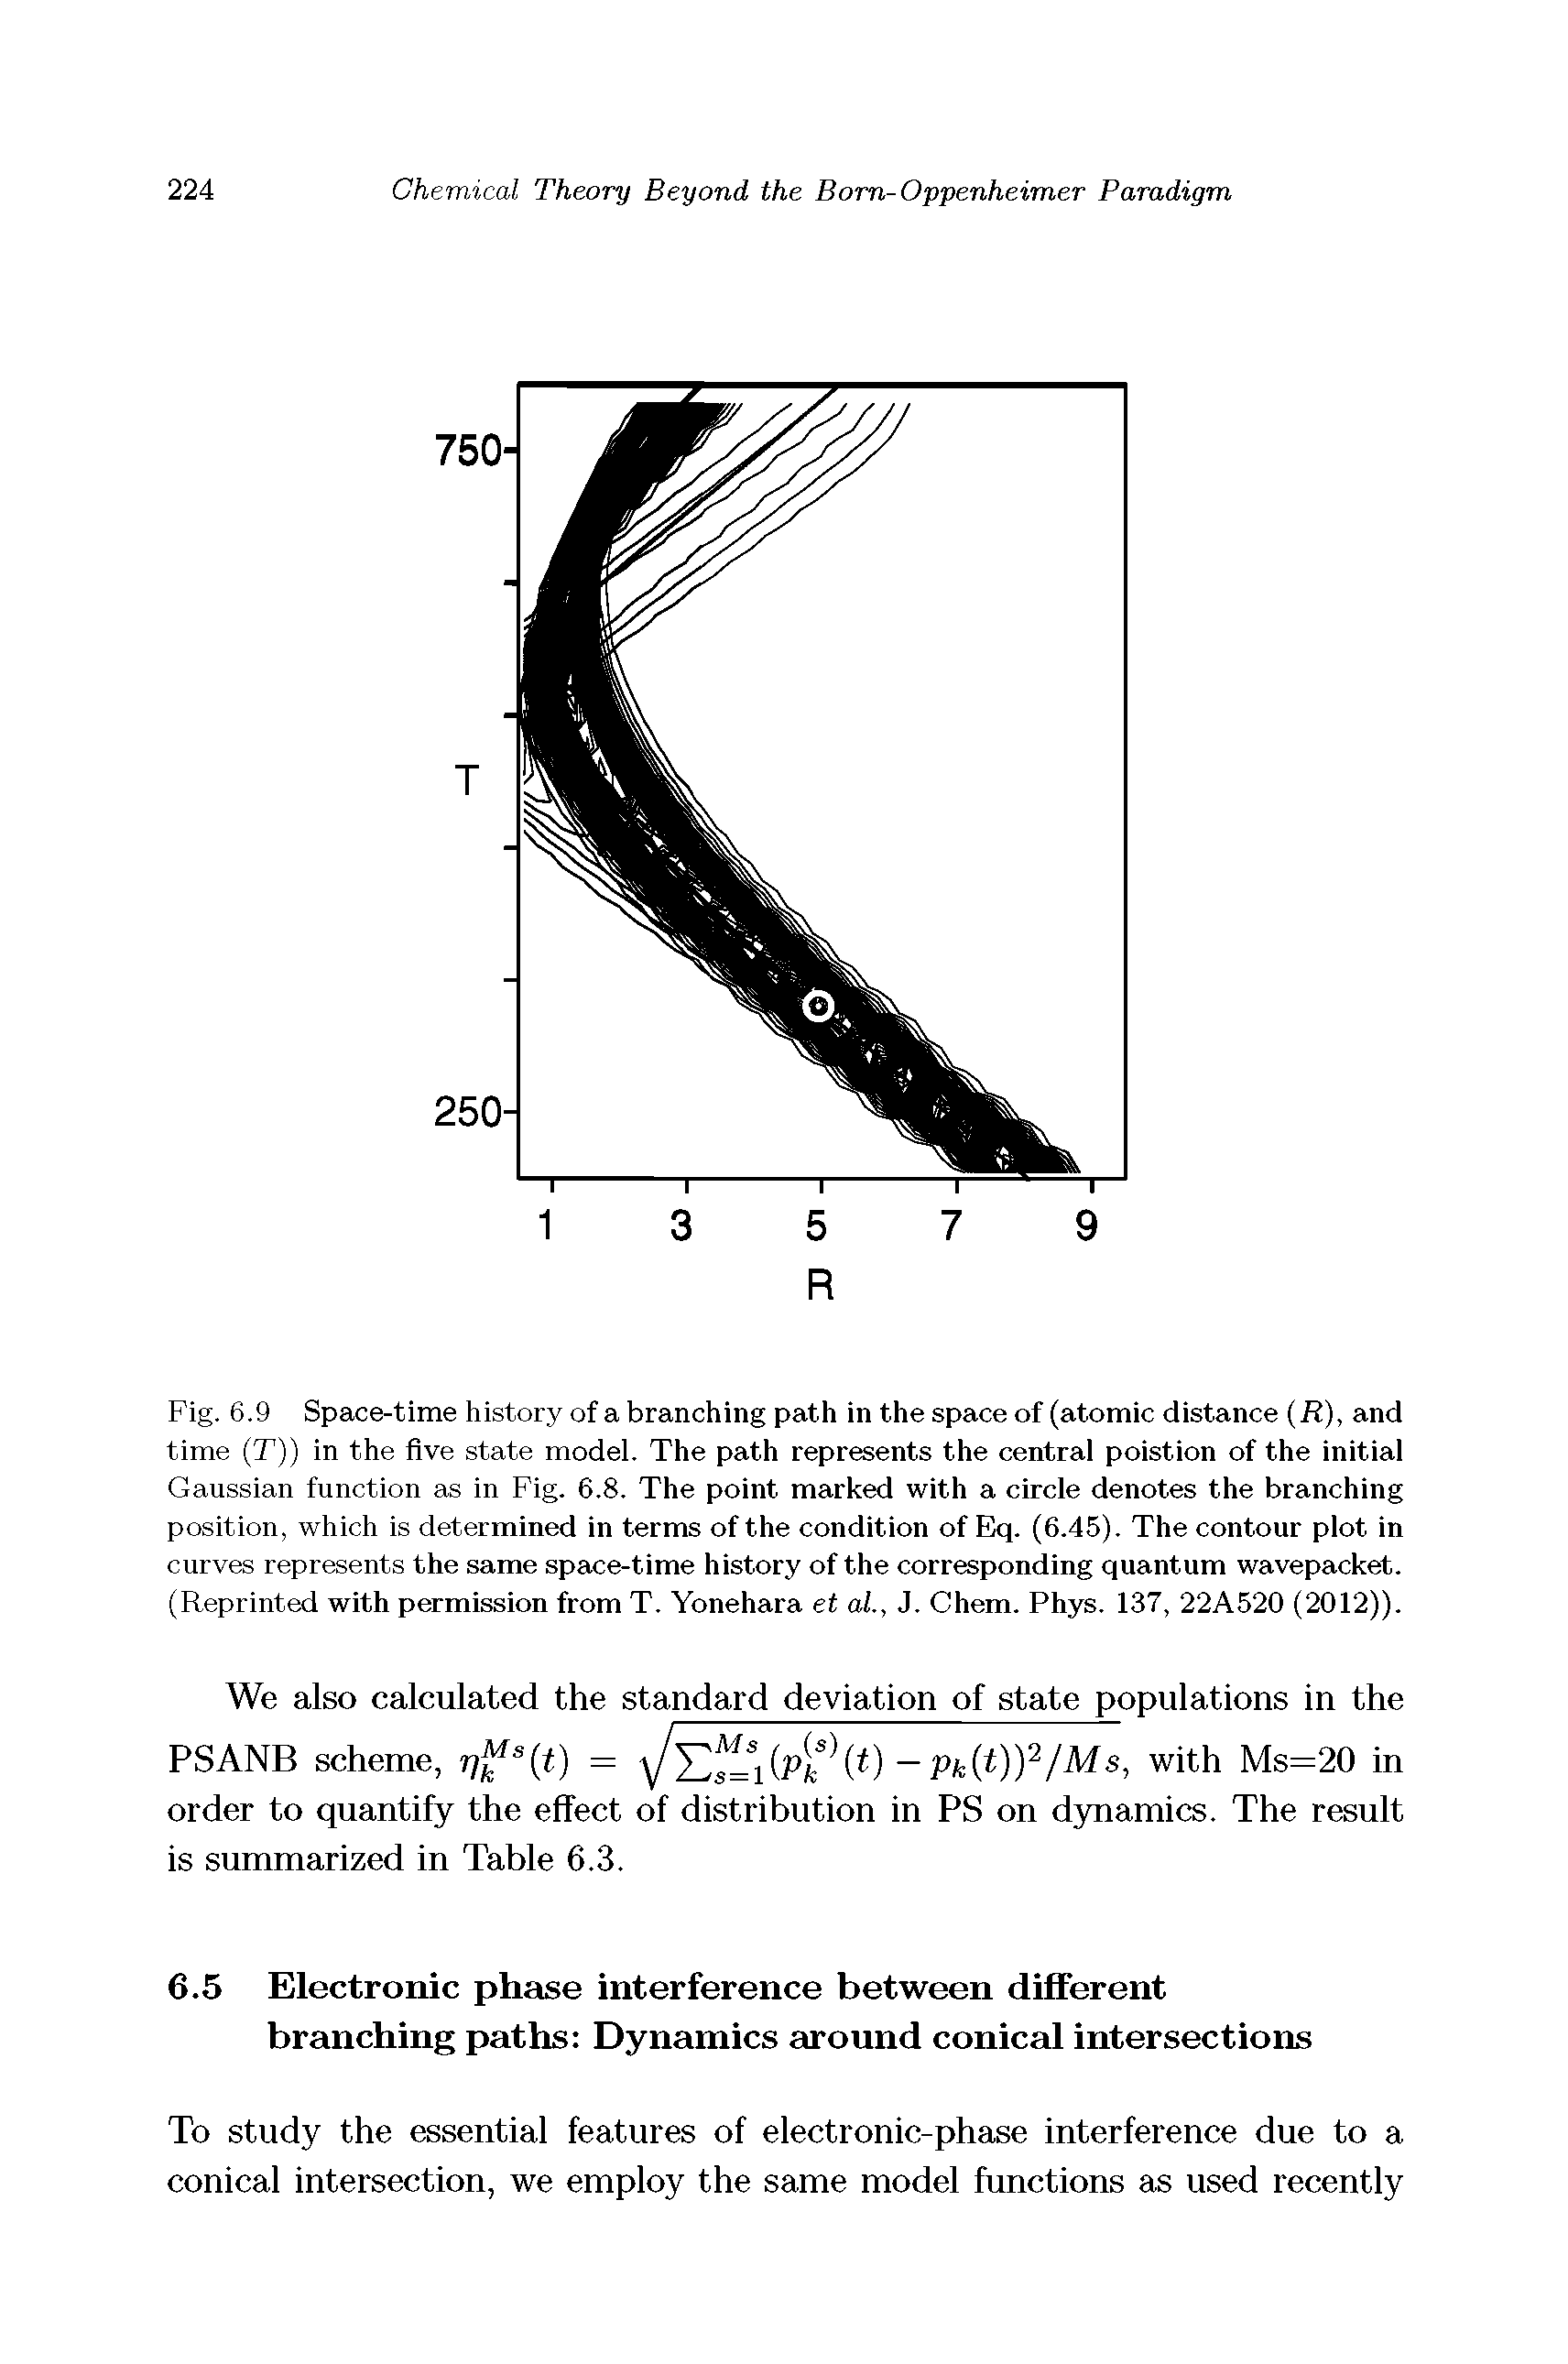 Fig. 6.9 Space-time history of a branching path in the space of (atomic distance (R), and time (T)) in the five state model. The path represents the central poistion of the initial Gaussian function as in Fig. 6.8. The point marked with a circle denotes the branching position, which is determined in terms of the condition of Ekj. (6.45). The contour plot in curves represents the same space-time history of the corresponding quantum wavepacket. (Reprinted with permission from T. Yonehara et al., J. Chem. Phys. 137, 22A520 (2012)).